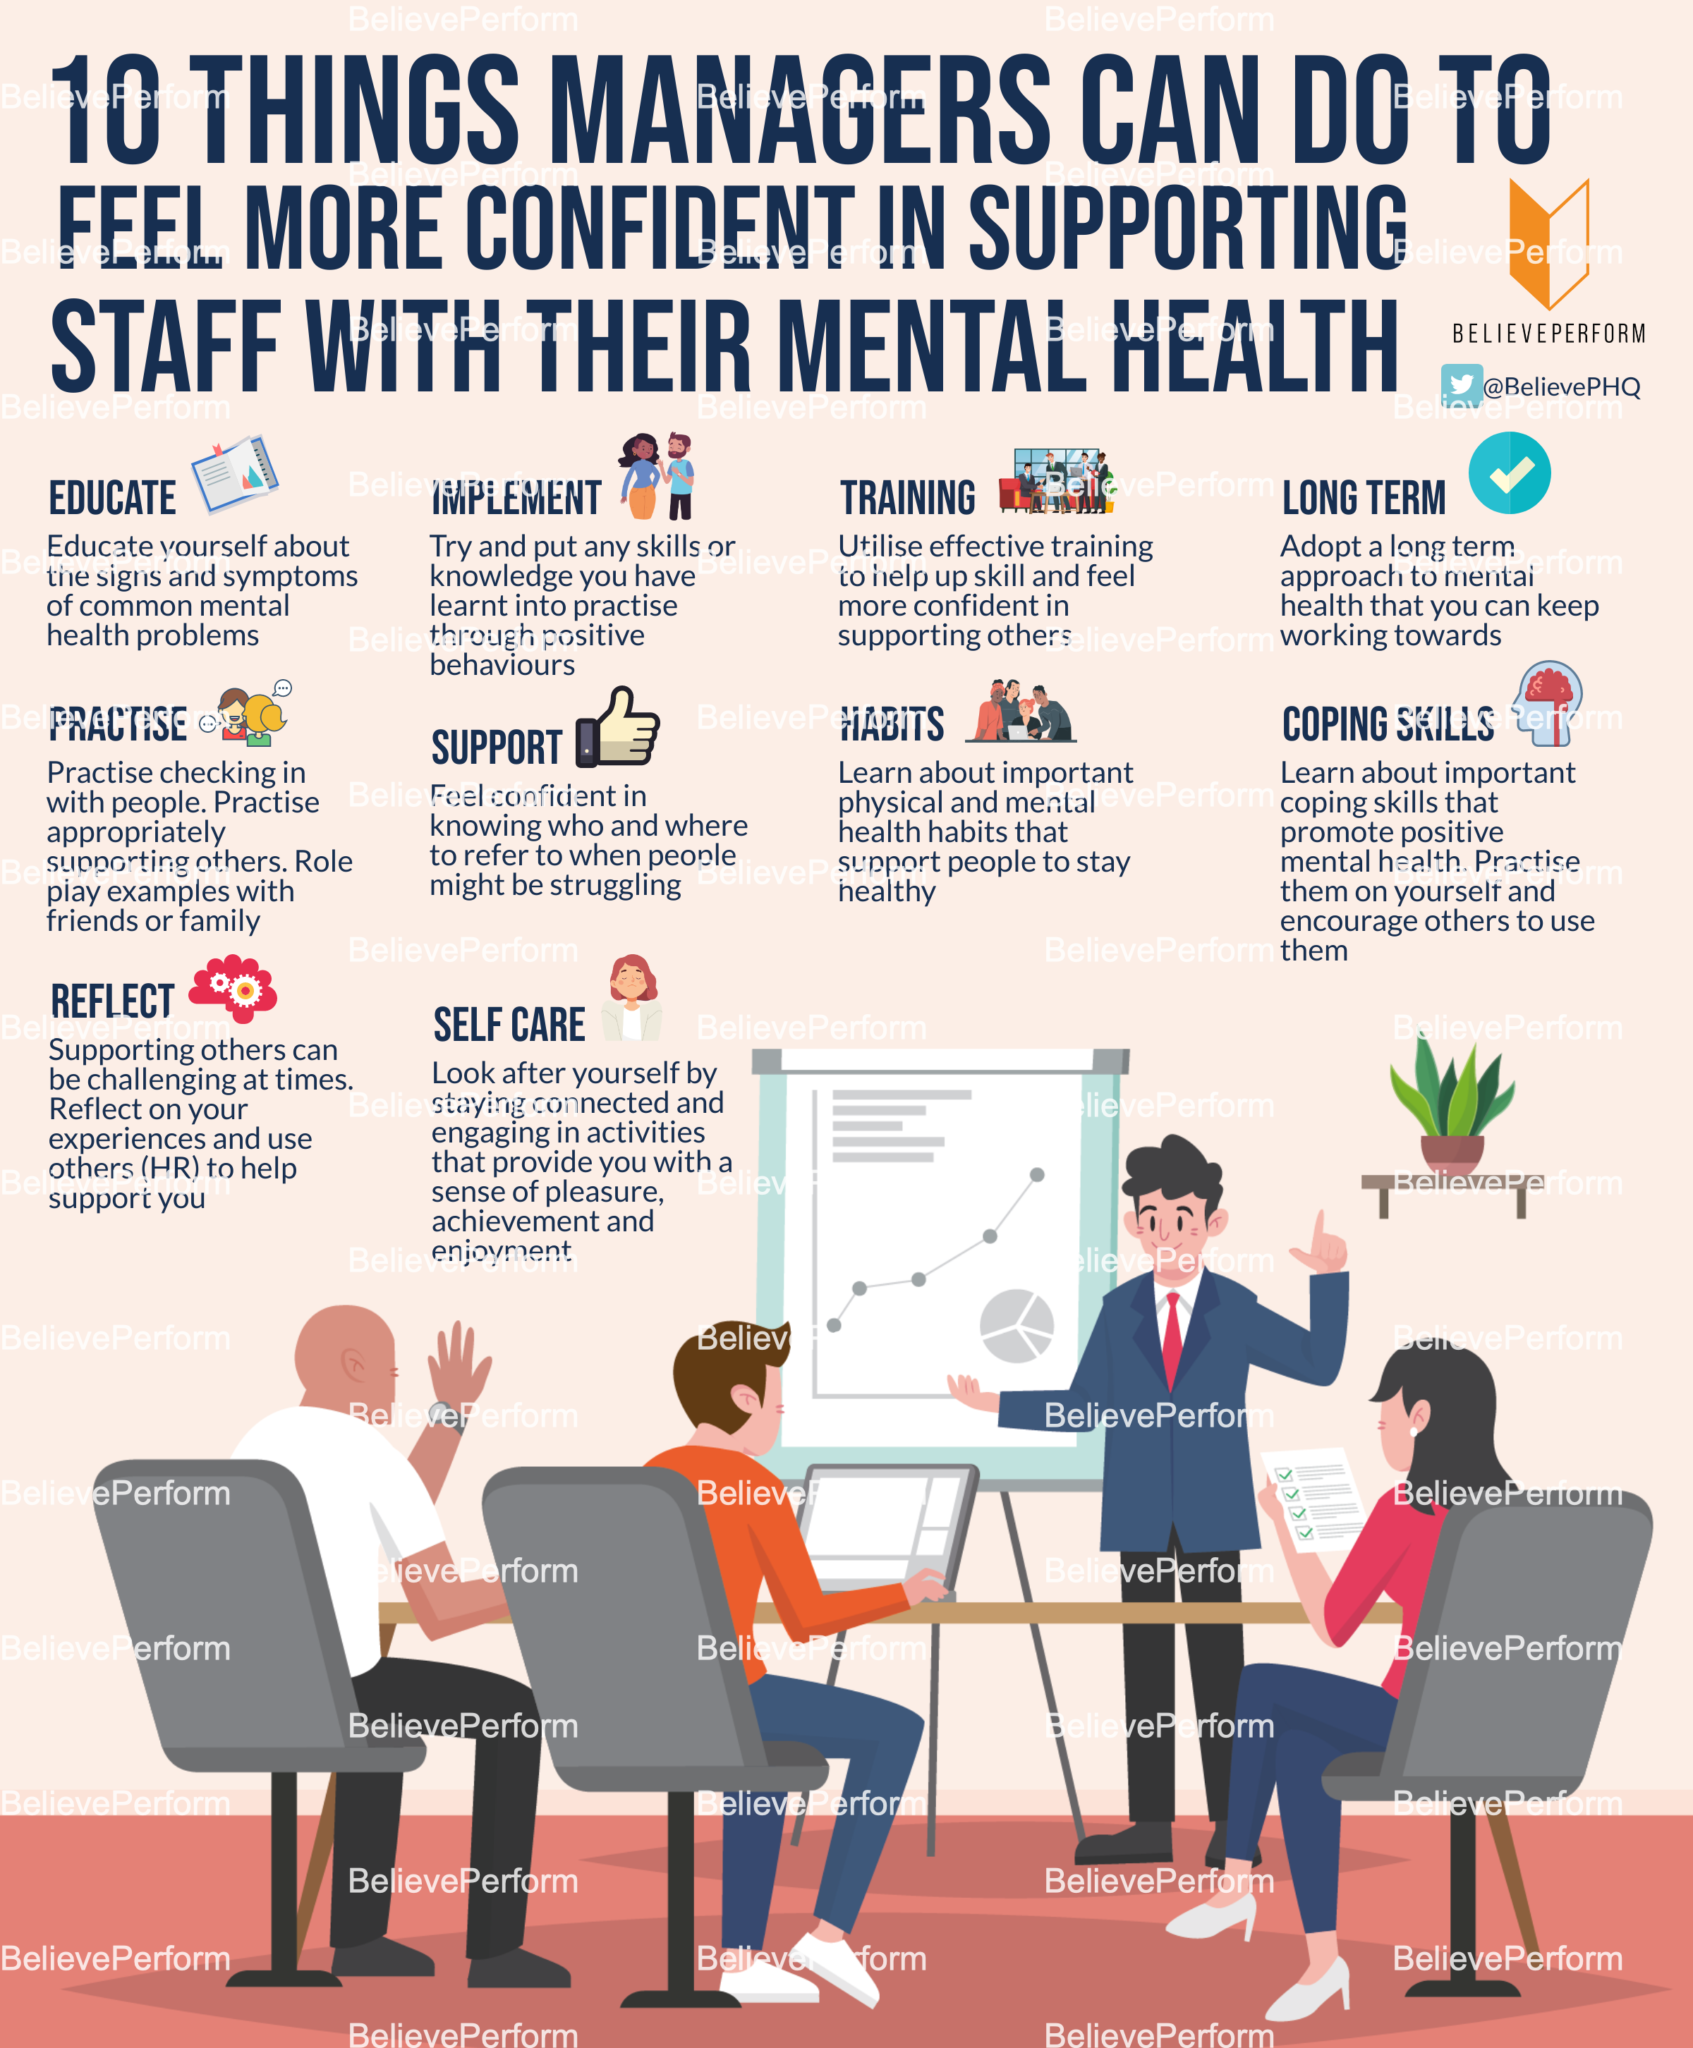 Things Managers Can Do To Feel More Confident In Supporting Staff With Their Mental Health